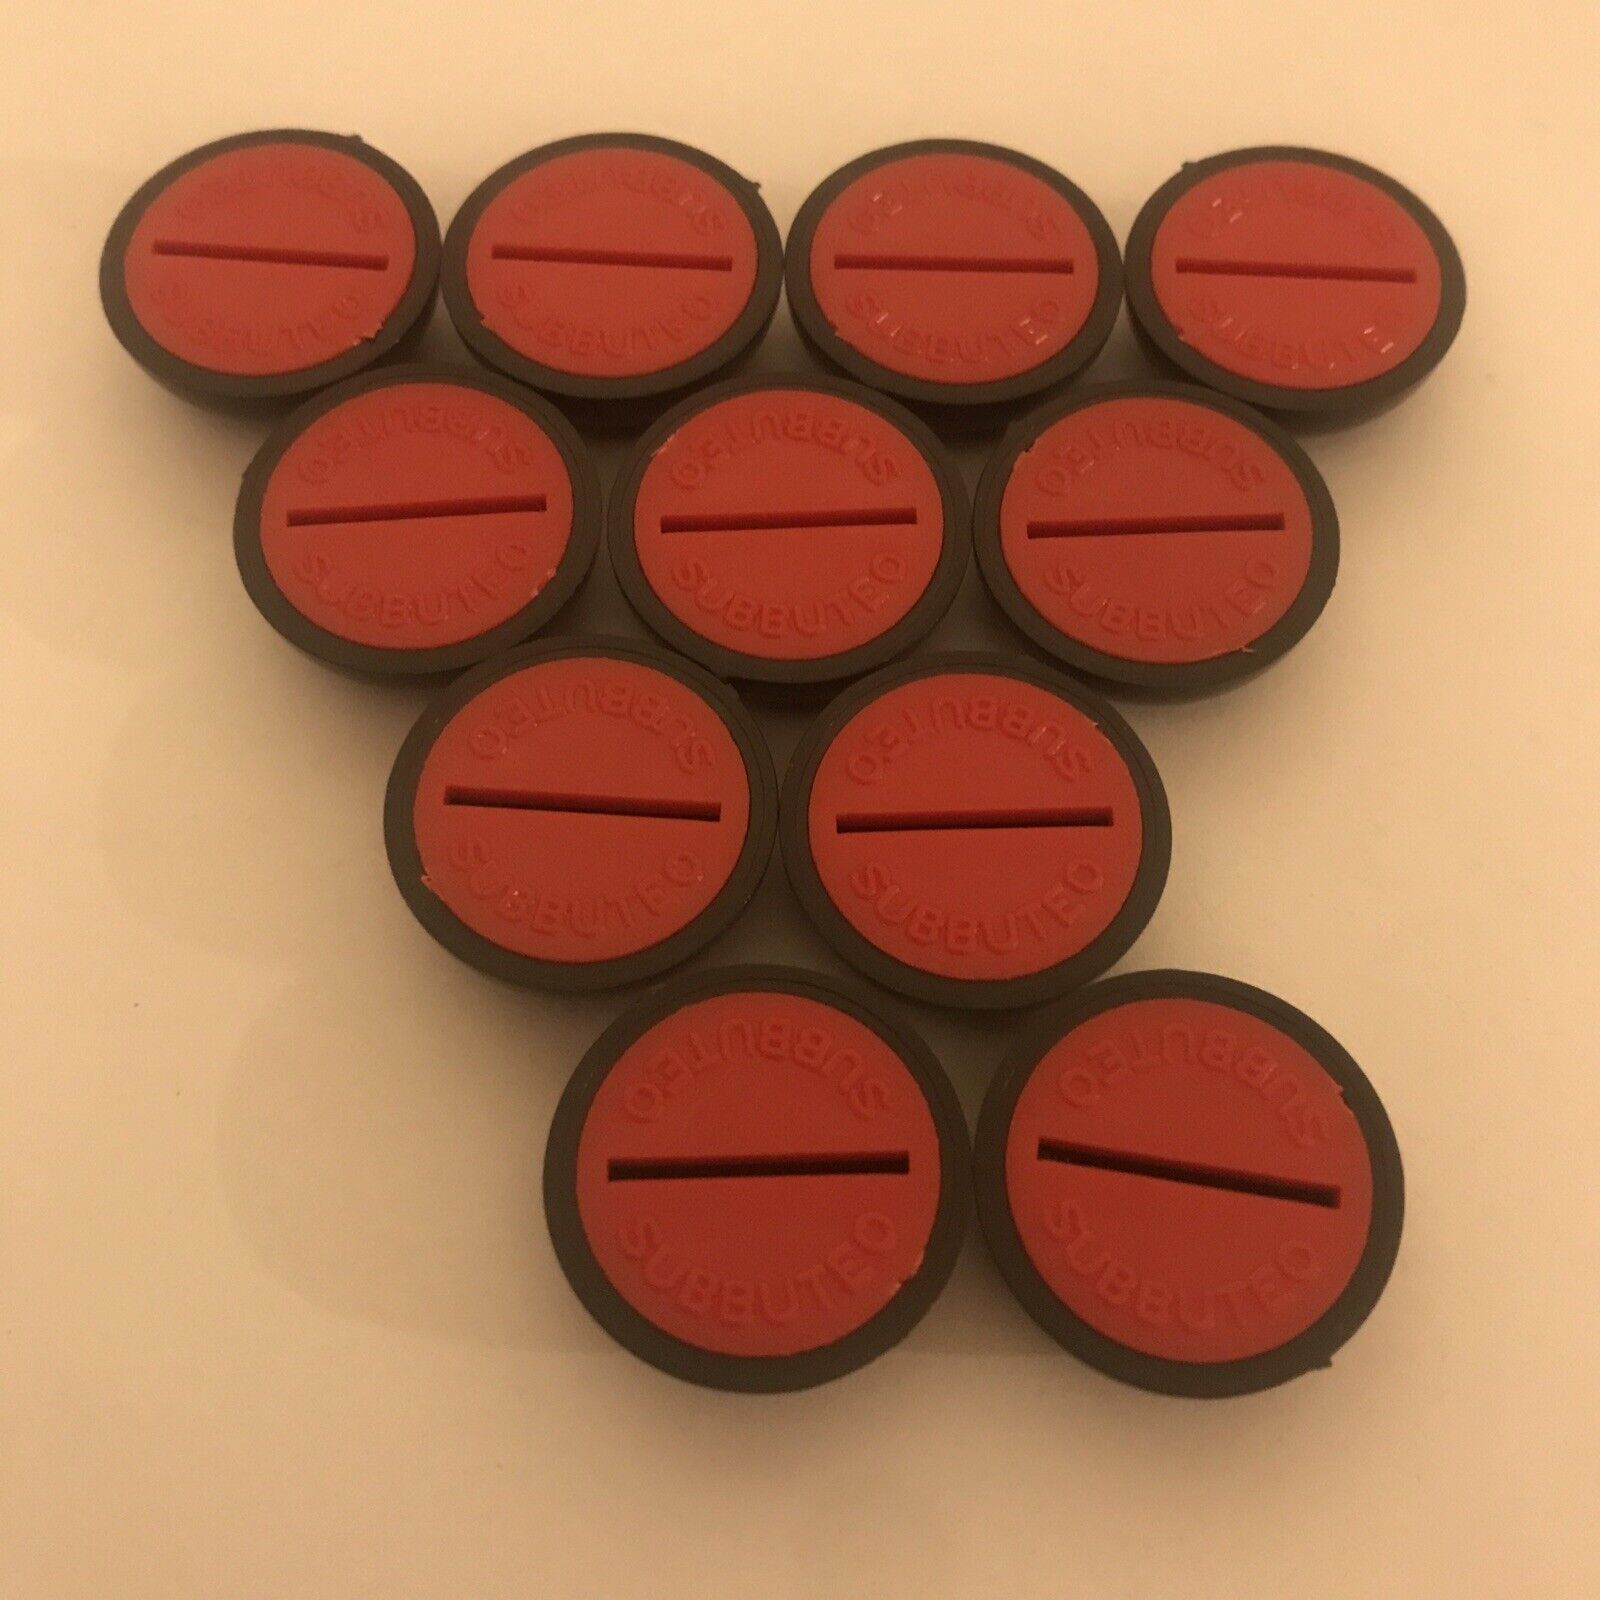 Subbuteo Heavyweight Bases And Discs Black Bases And Red Discs